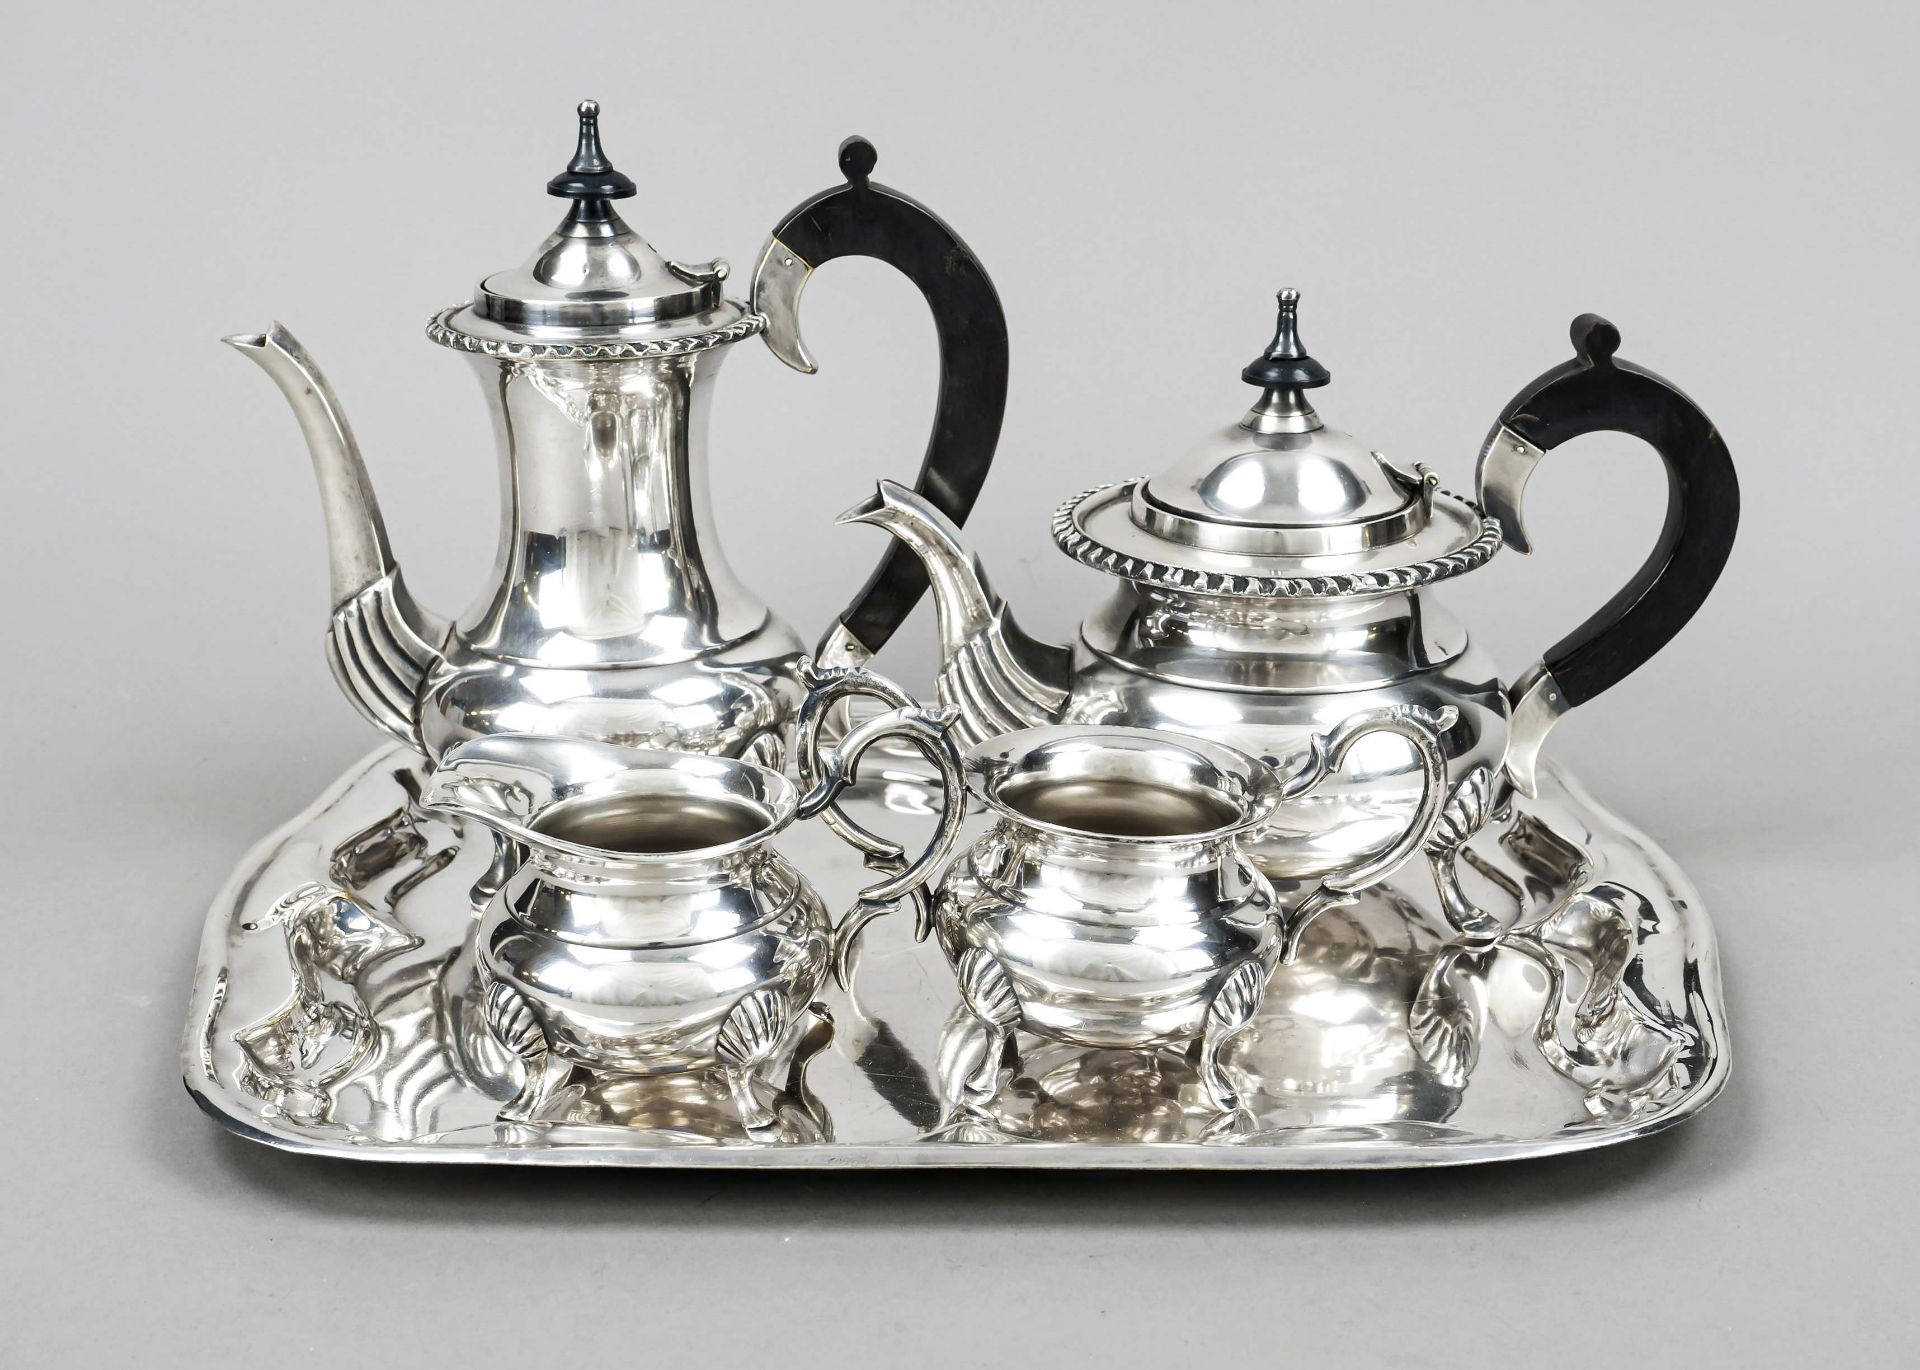 Four-piece coffee and tea set on tray, 20th century plated, each vessel on 4 decorated feet, bulbous